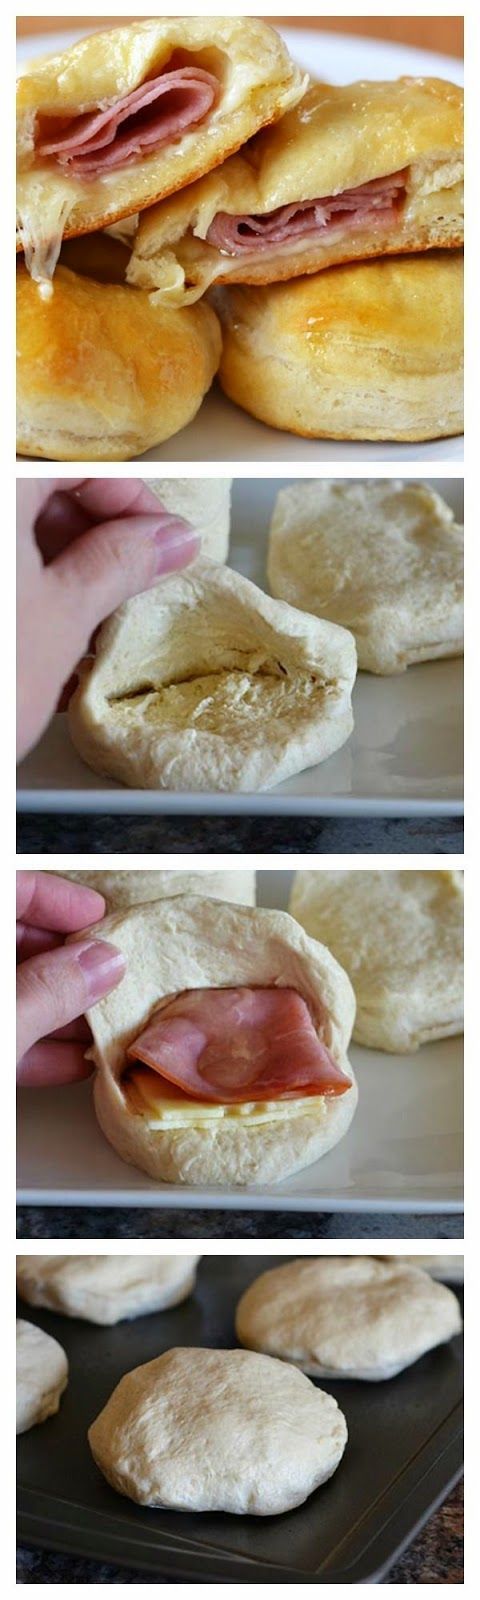 Stuffed Honey-Ham Biscuits Recipe ~ stuff biscuits with honey, ham and cheese to make a meal-worthy biscuit sammie.